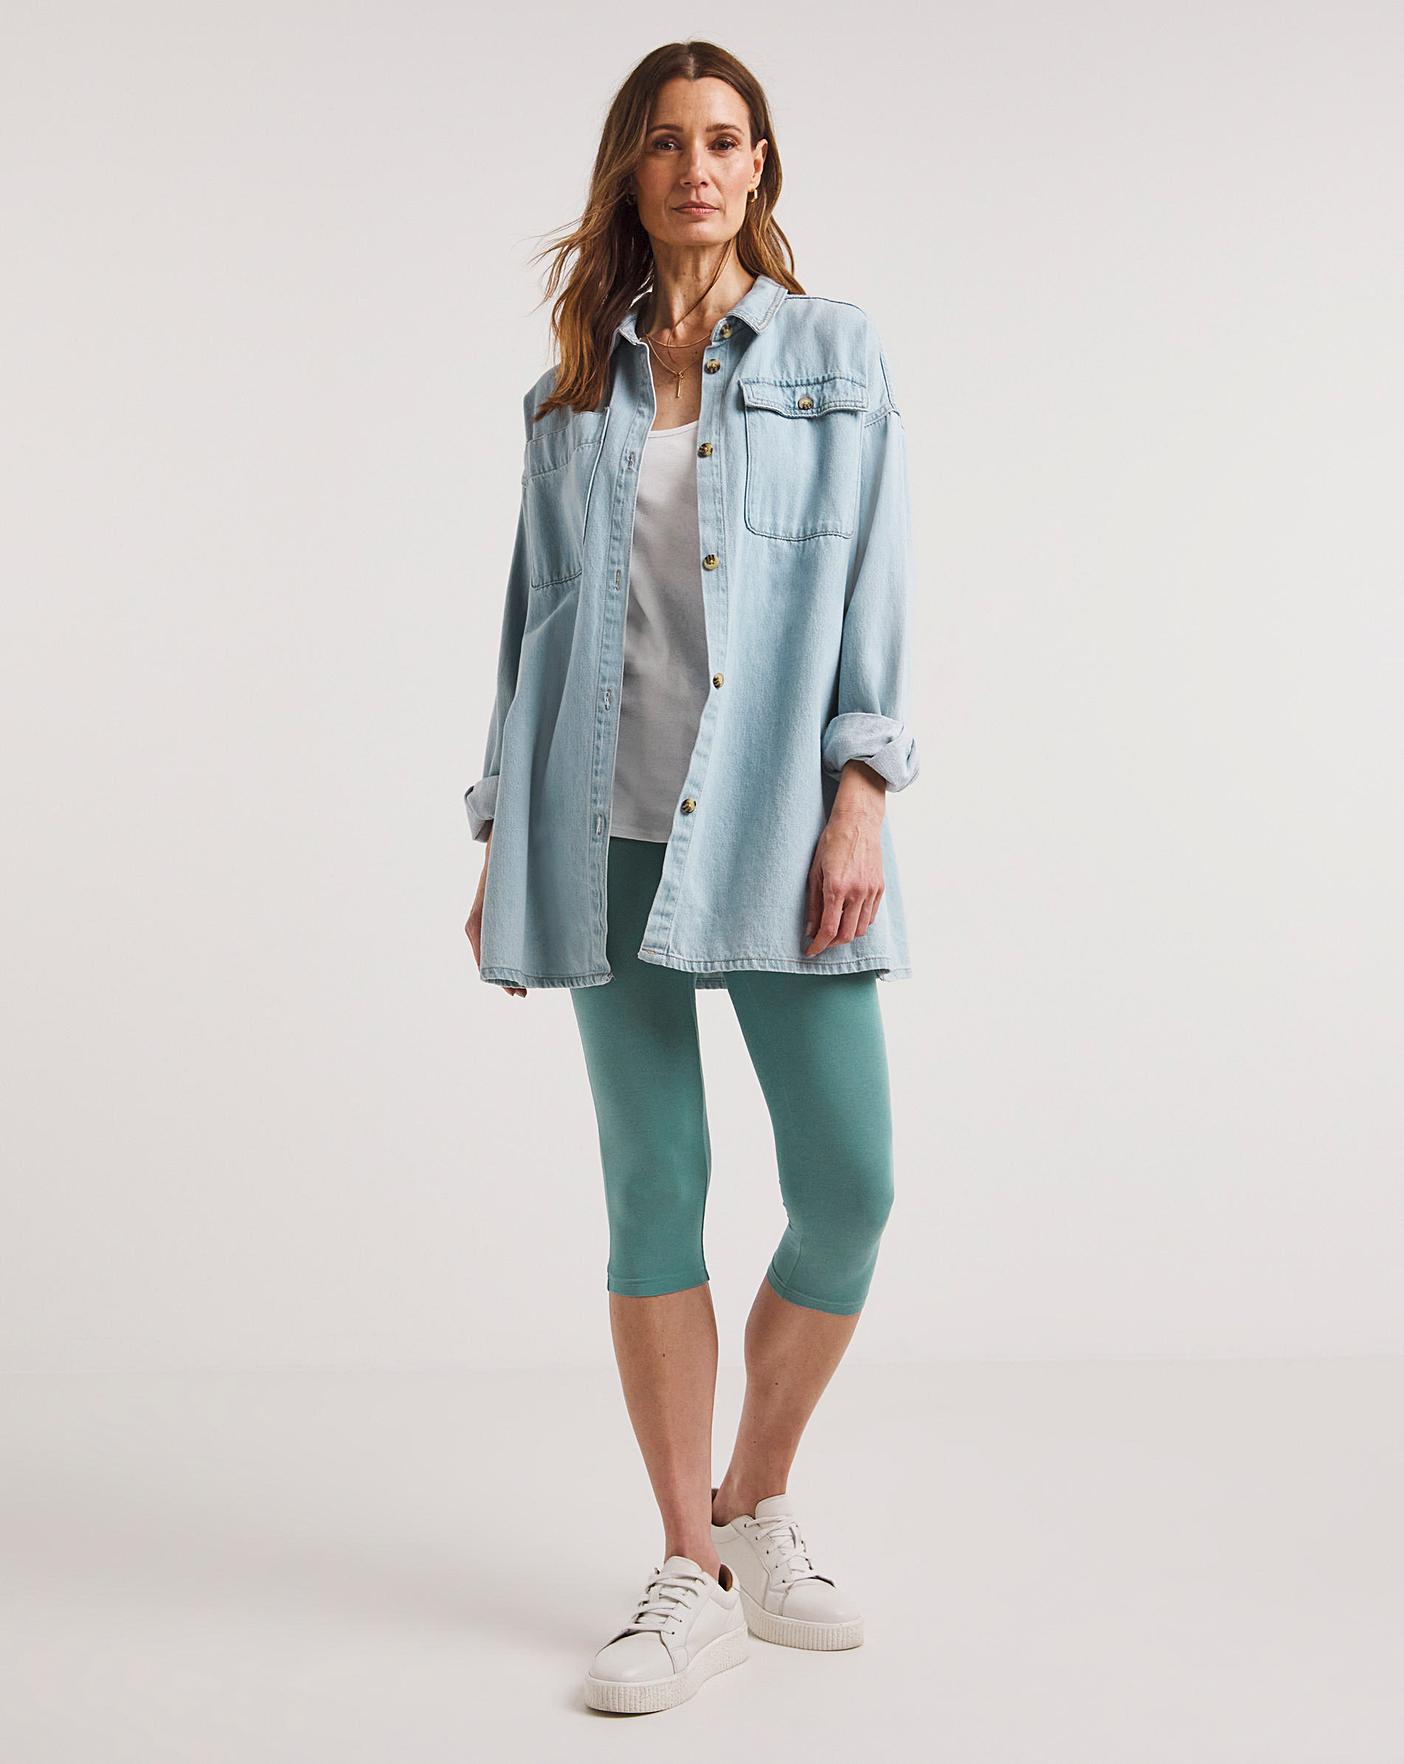 Three Ways to Style a Denim Shirt - Pearls and Pantsuits